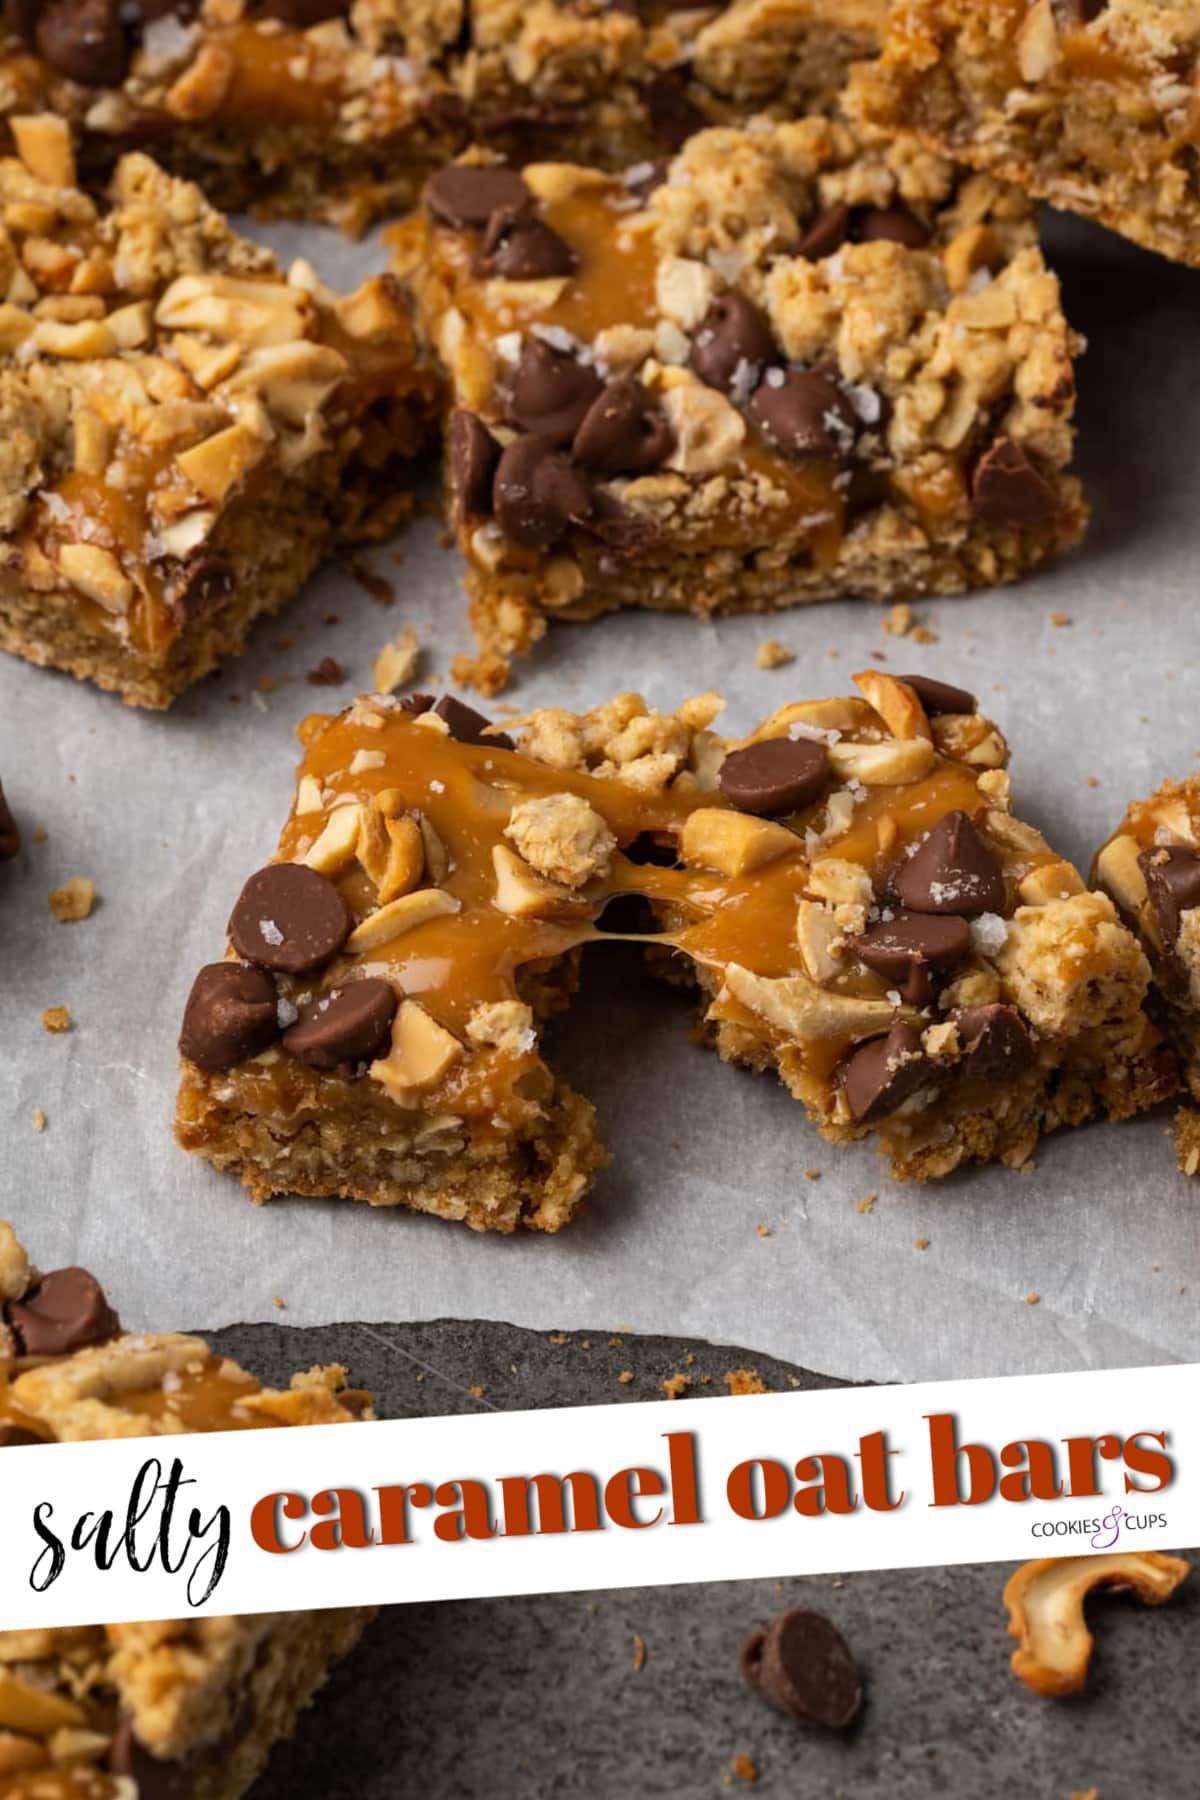 Caramel Oat Bars Pinterest Image with text